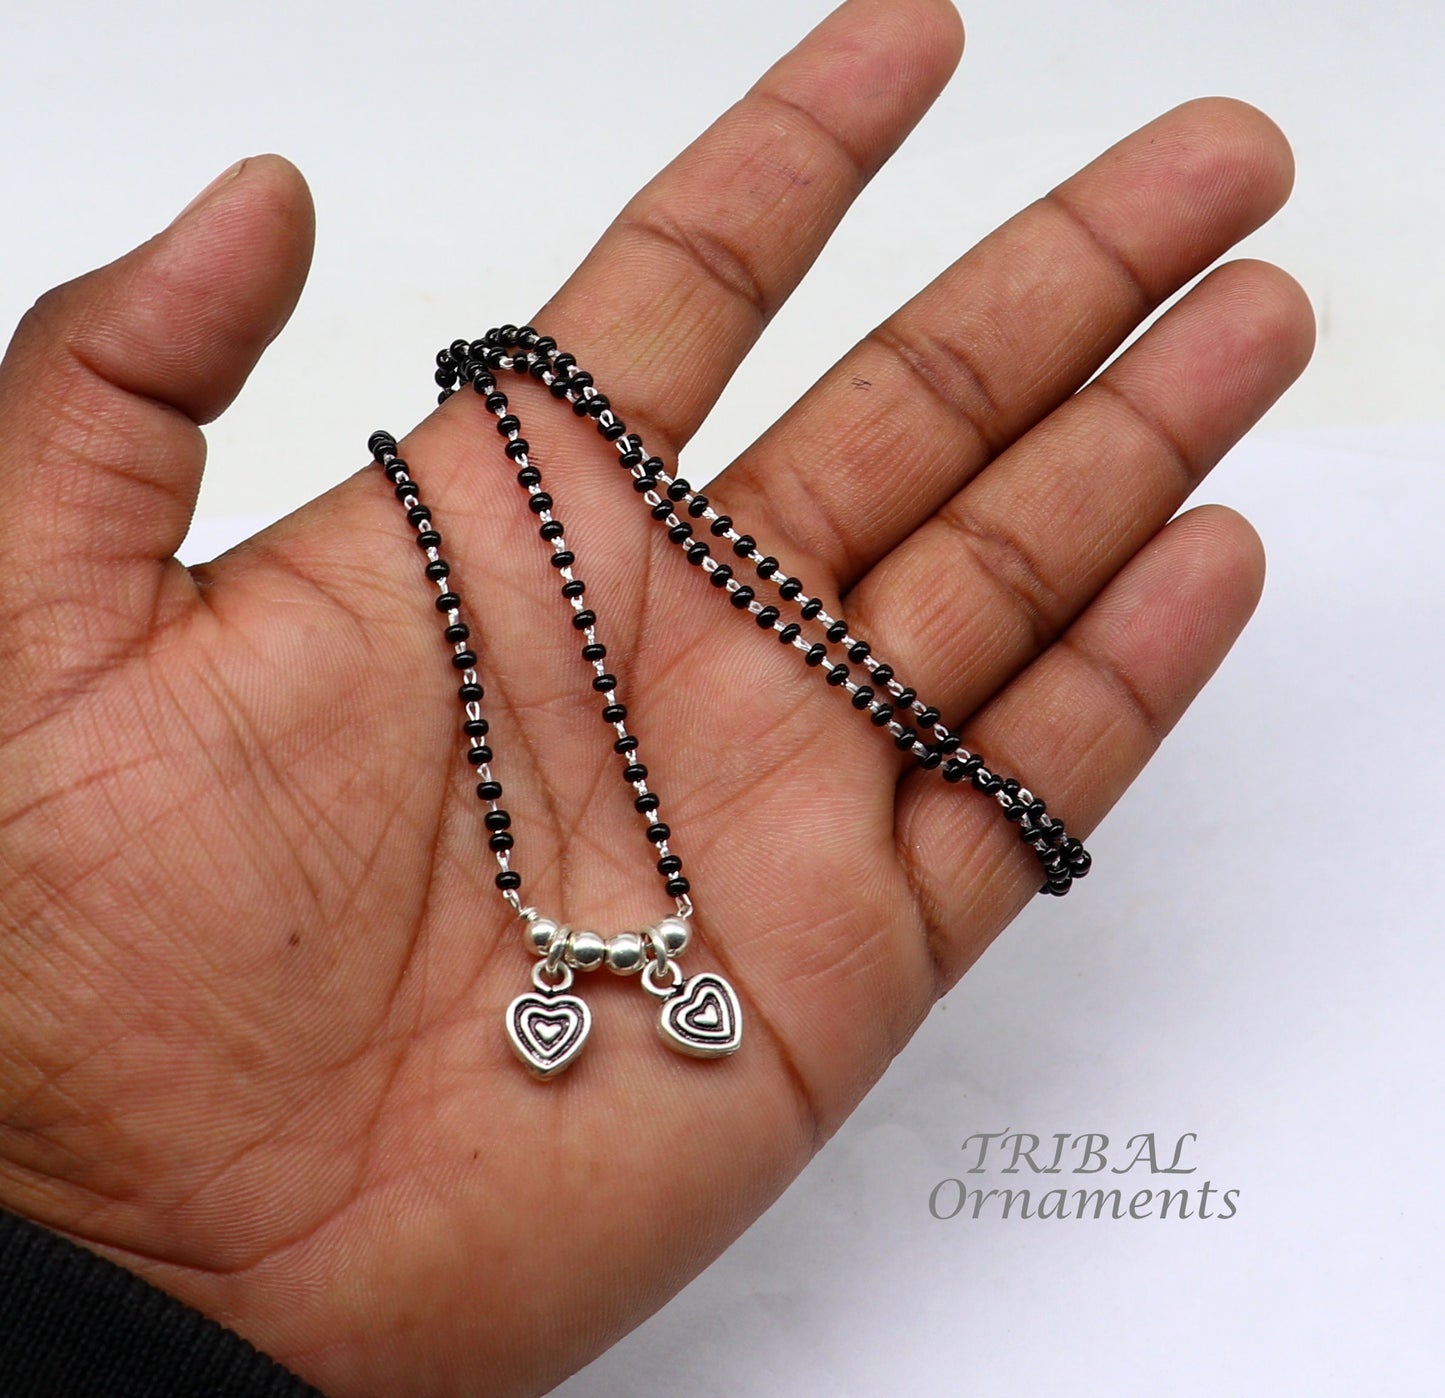 925 sterling silver black beads chain necklace, vintage south indian Style pendant, traditional style brides Mangalsutra necklace set505 - TRIBAL ORNAMENTS